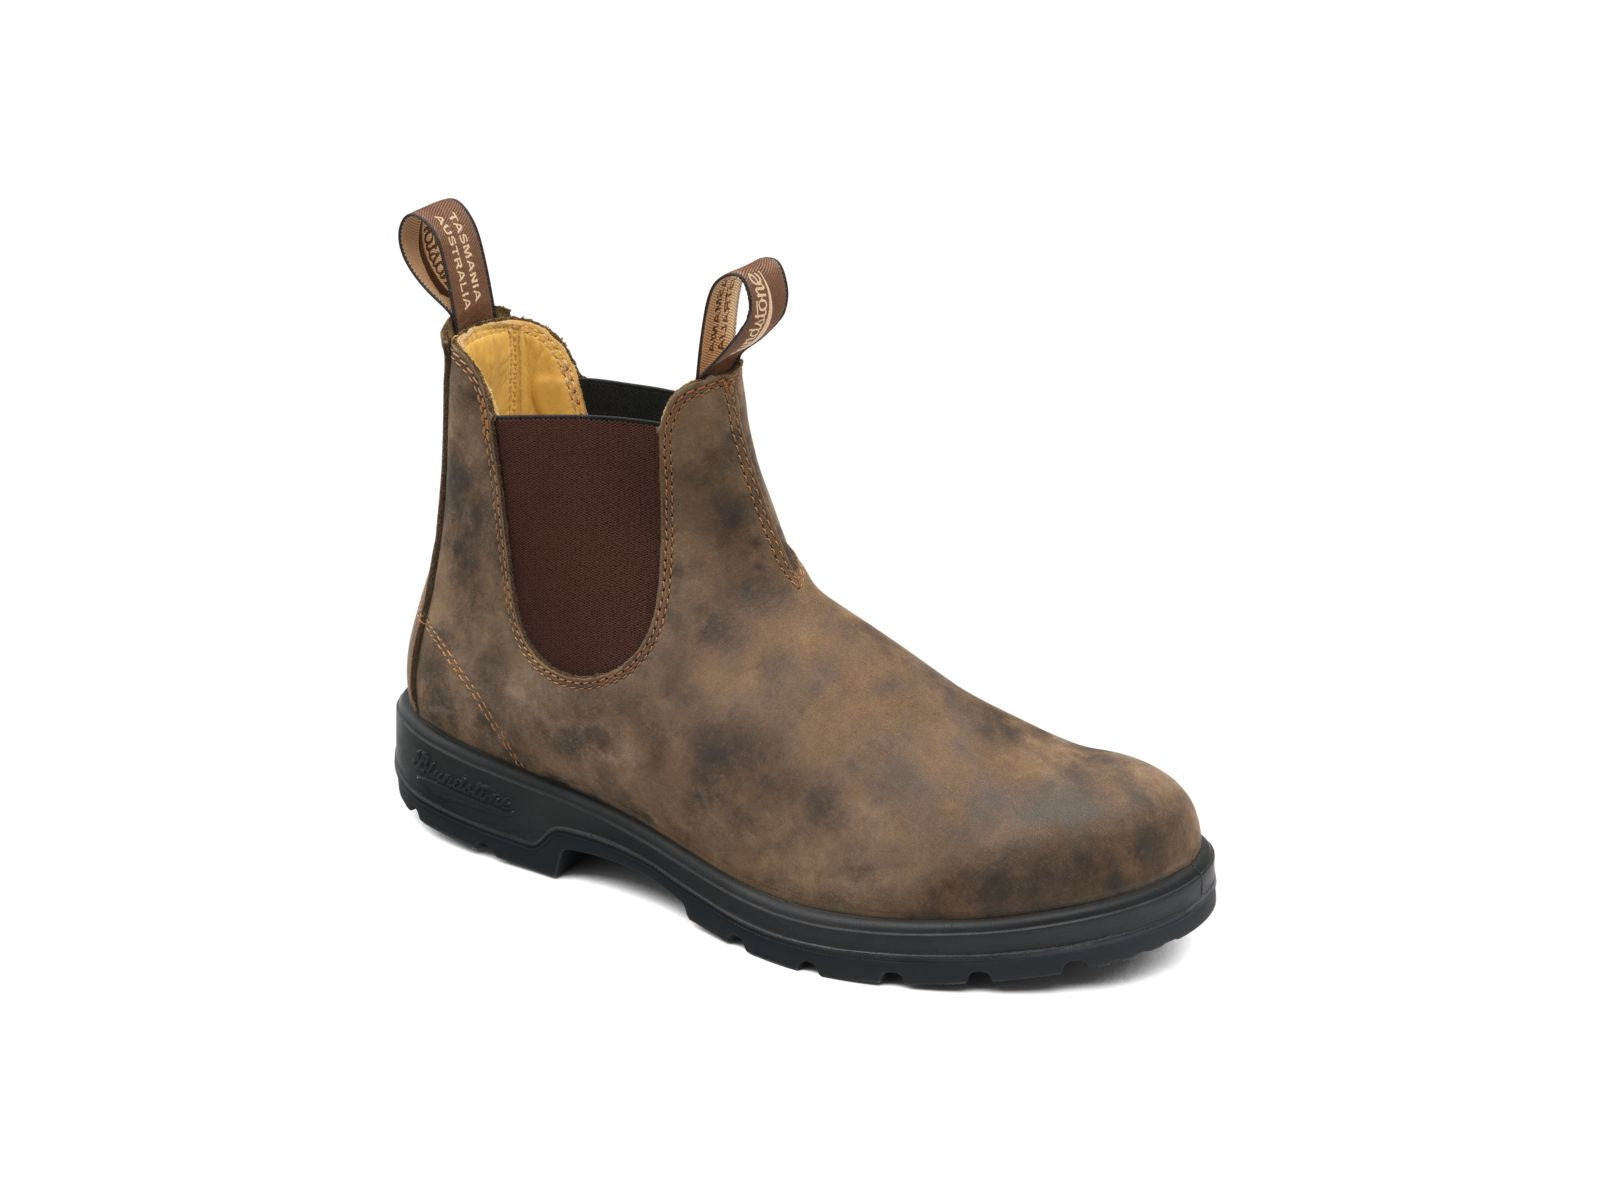 BLUNDSTONE 585 Rustic Brown ankle boot